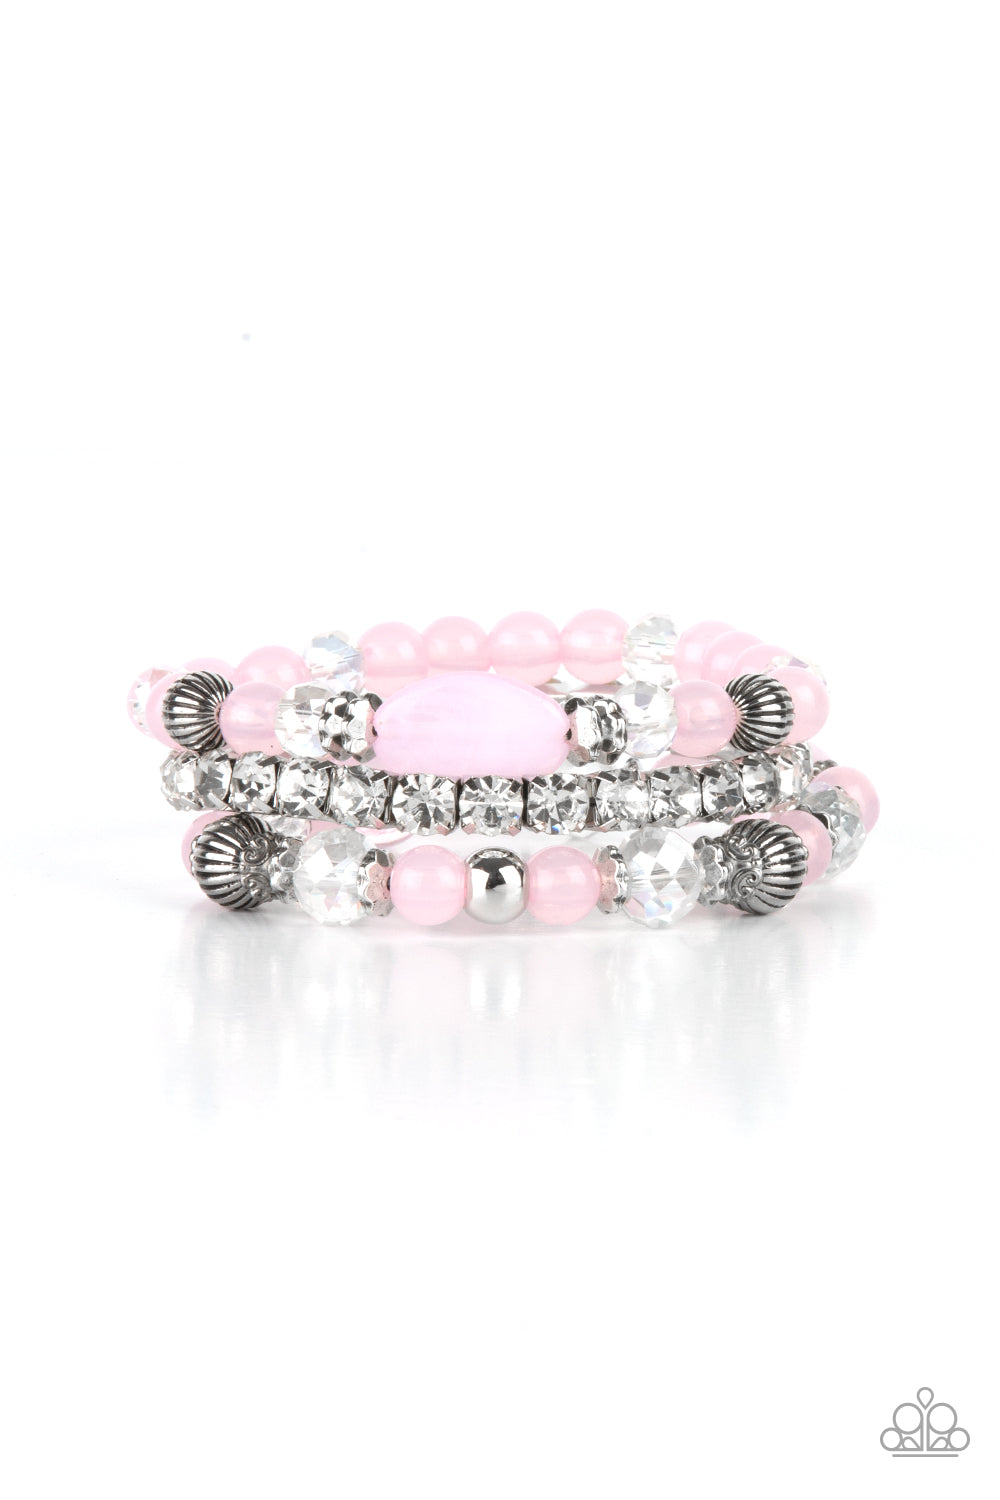 Ethereal Etiquette Pink Bracelet - Paparazzi Accessories  Infused with a stretchy strand of glassy white rhinestones, a mismatched collection of cloudy pink, white crystal-like, and ornate silver accents are threaded along stretchy bands around the wrist, creating ethereal layers.  All Paparazzi Accessories are lead free and nickel free!  Sold as one set of three bracelets.